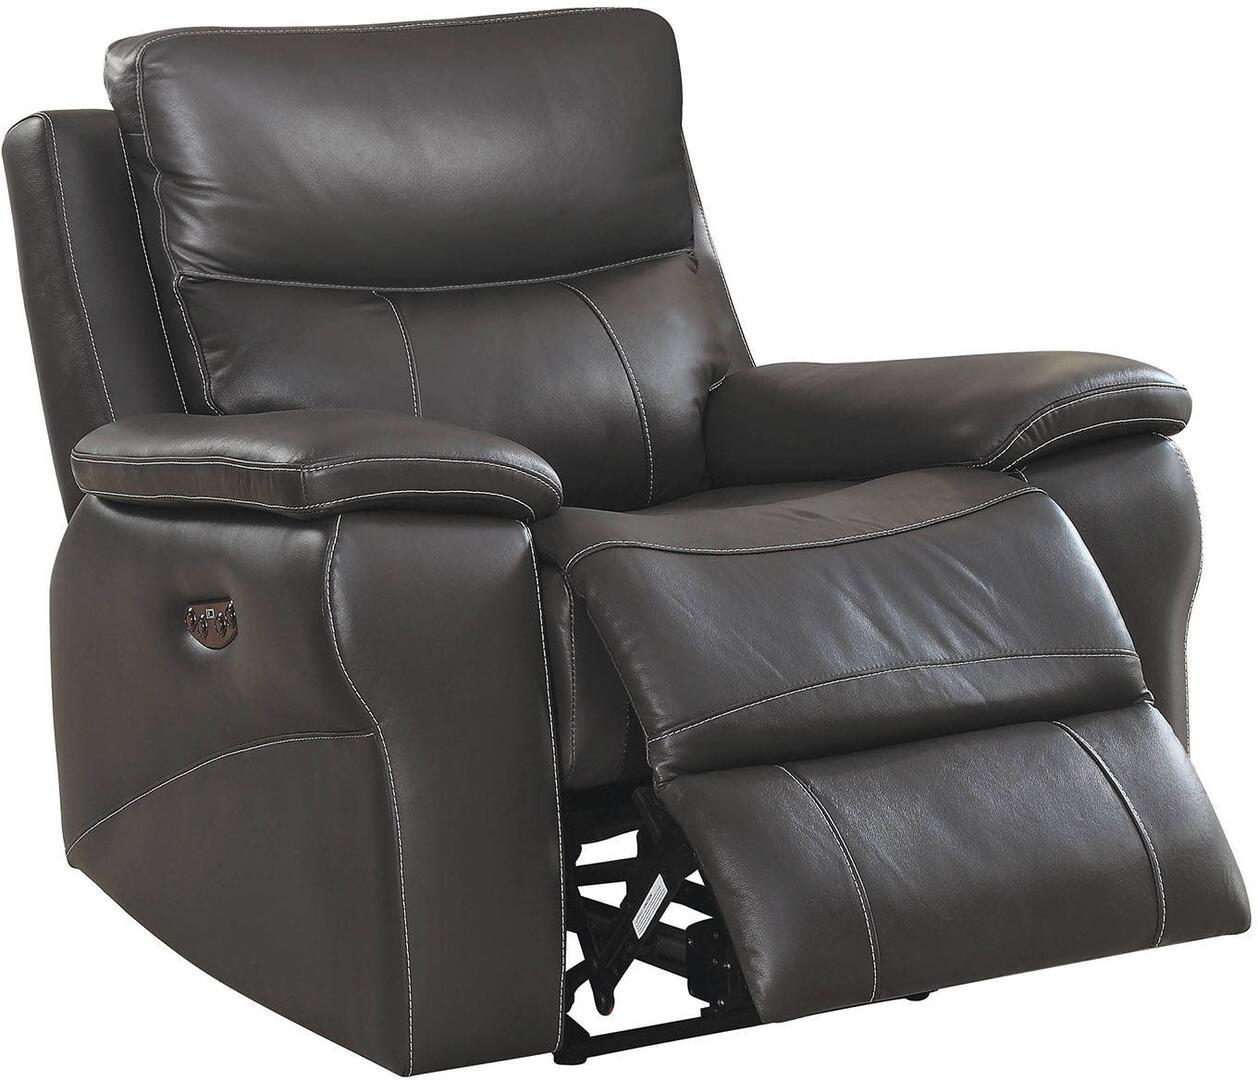 Transitional Recliner LILA CM6540-CH CM6540-CH in Gray Top grain leather